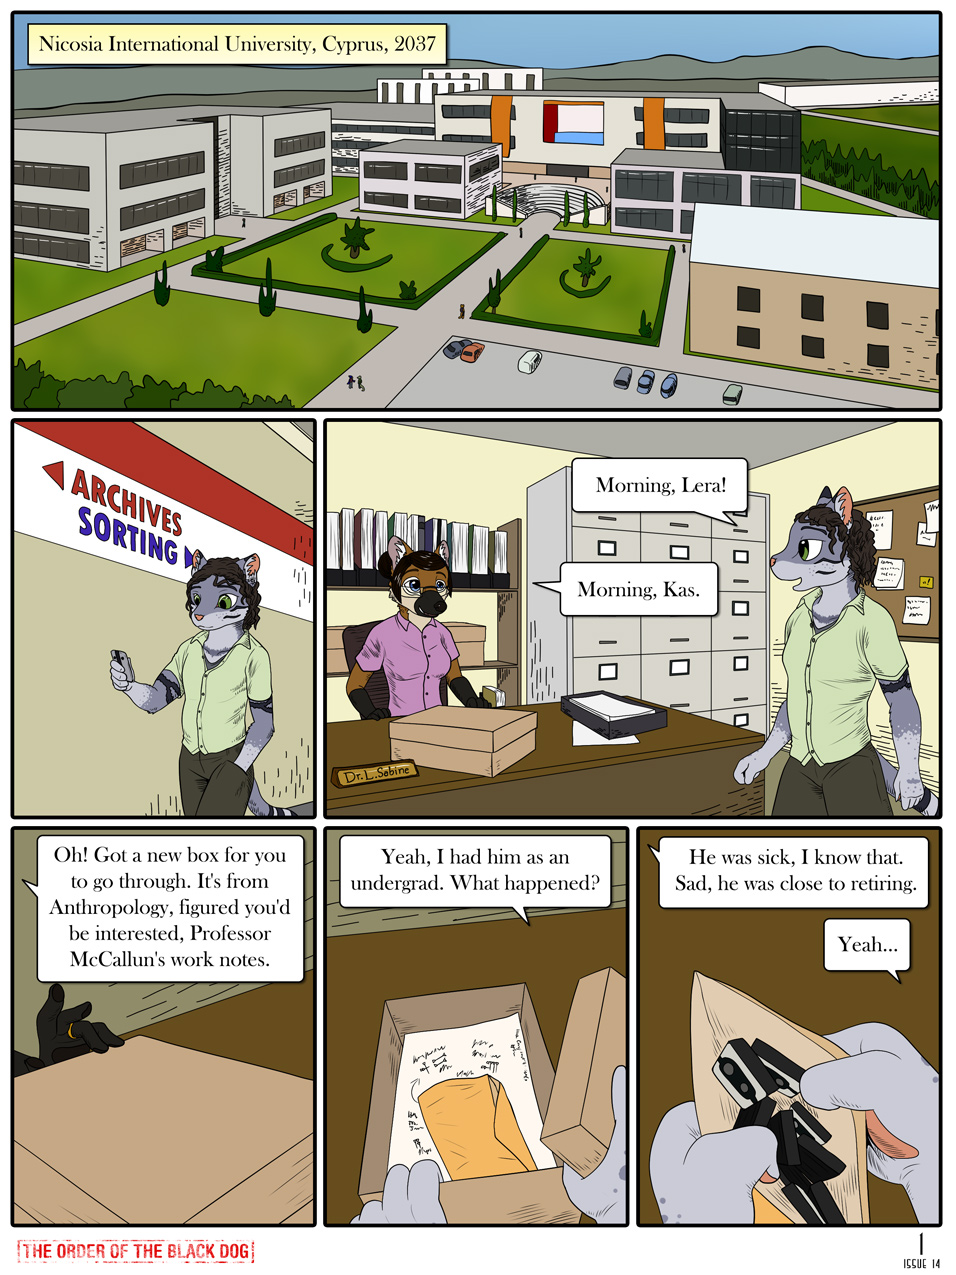 Issue 14, Page 1